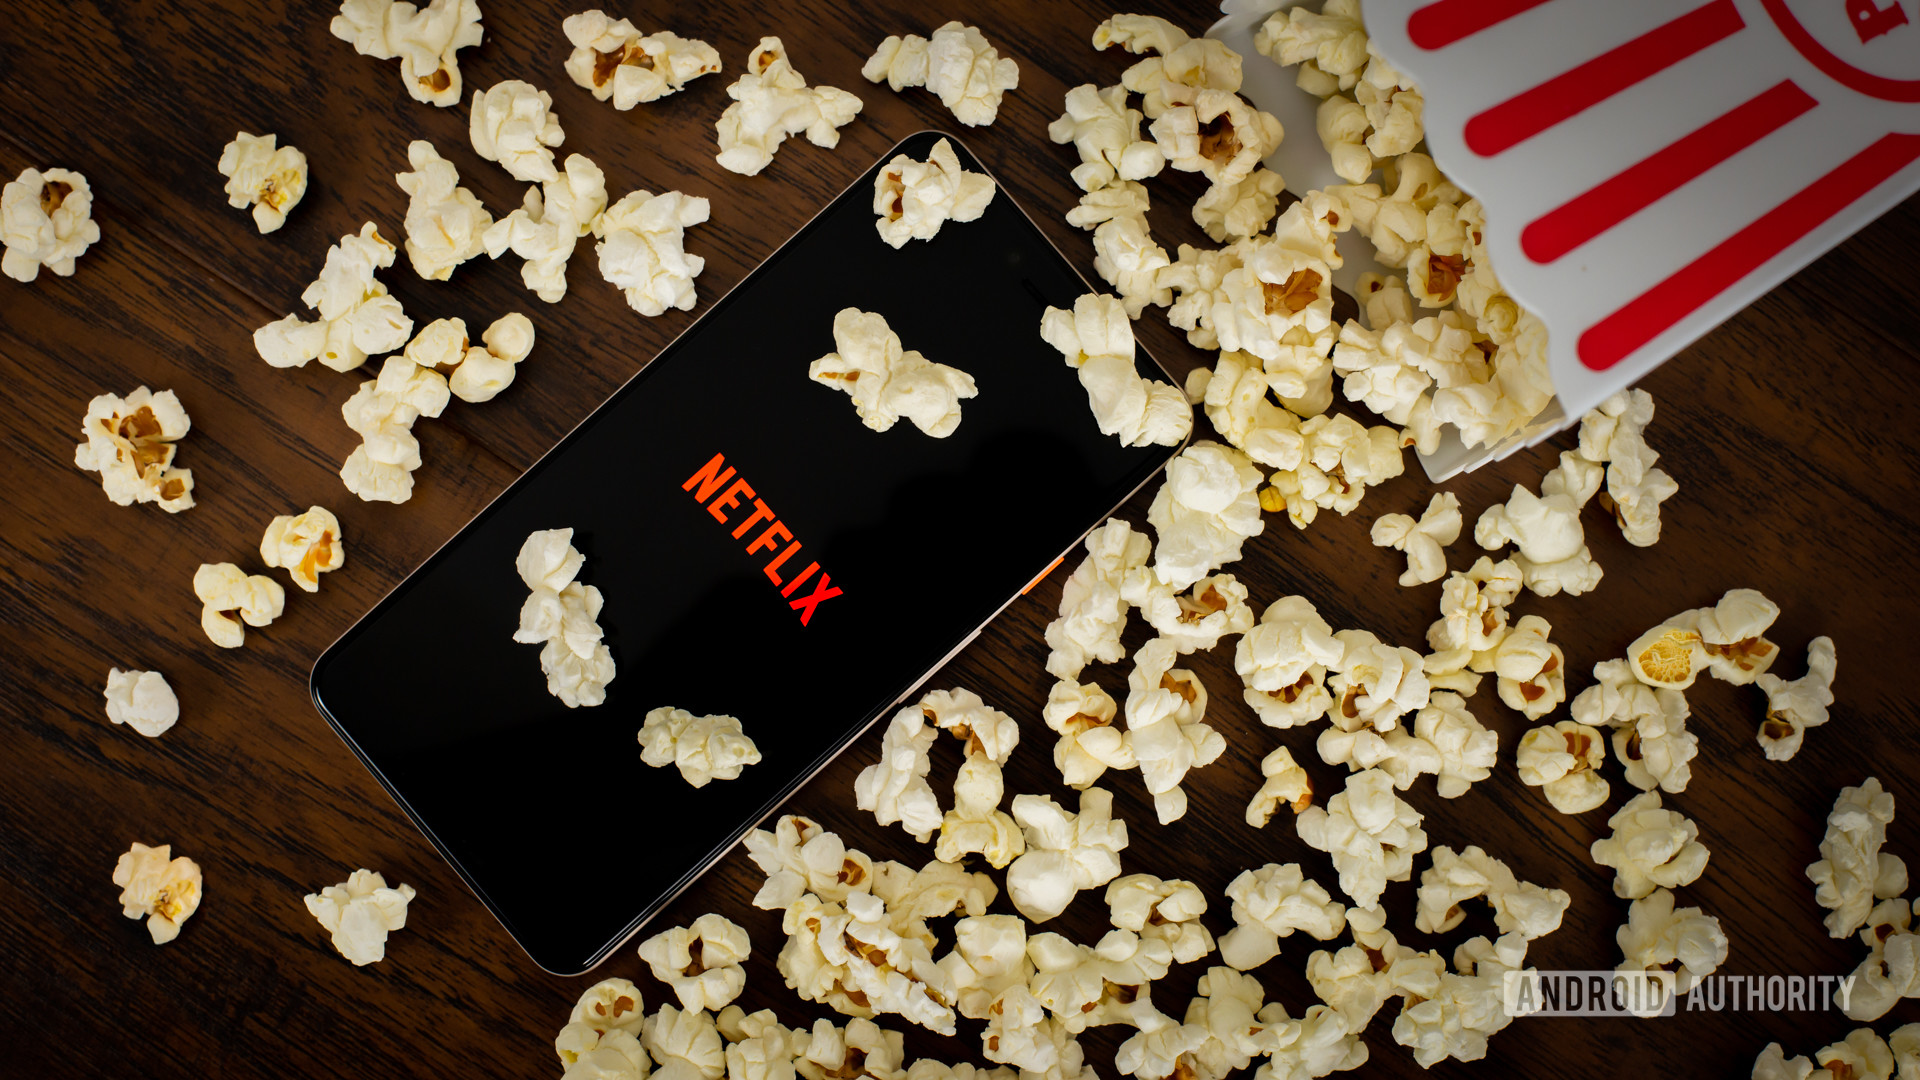 Netflix updates us on their paid password sharing plans –